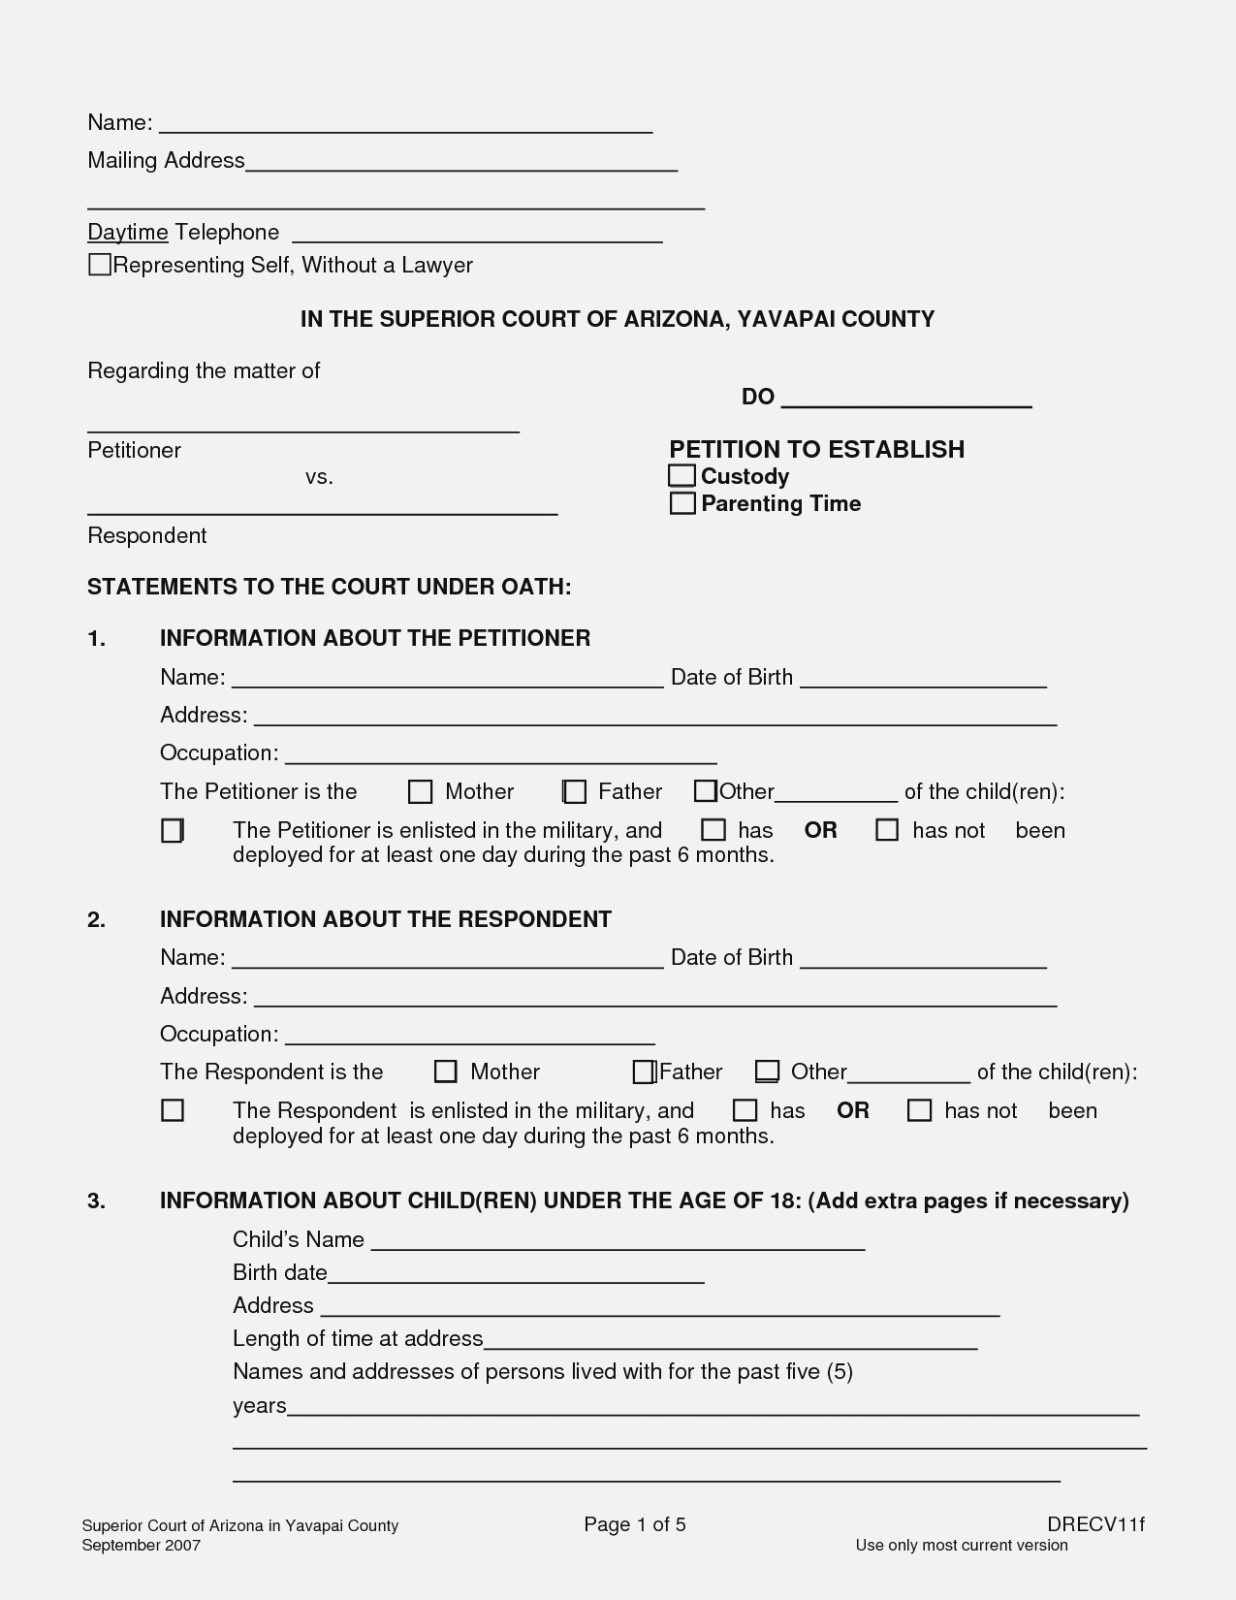 Is Free Printable | Realty Executives Mi : Invoice And Resume - Free Printable Guardianship Forms